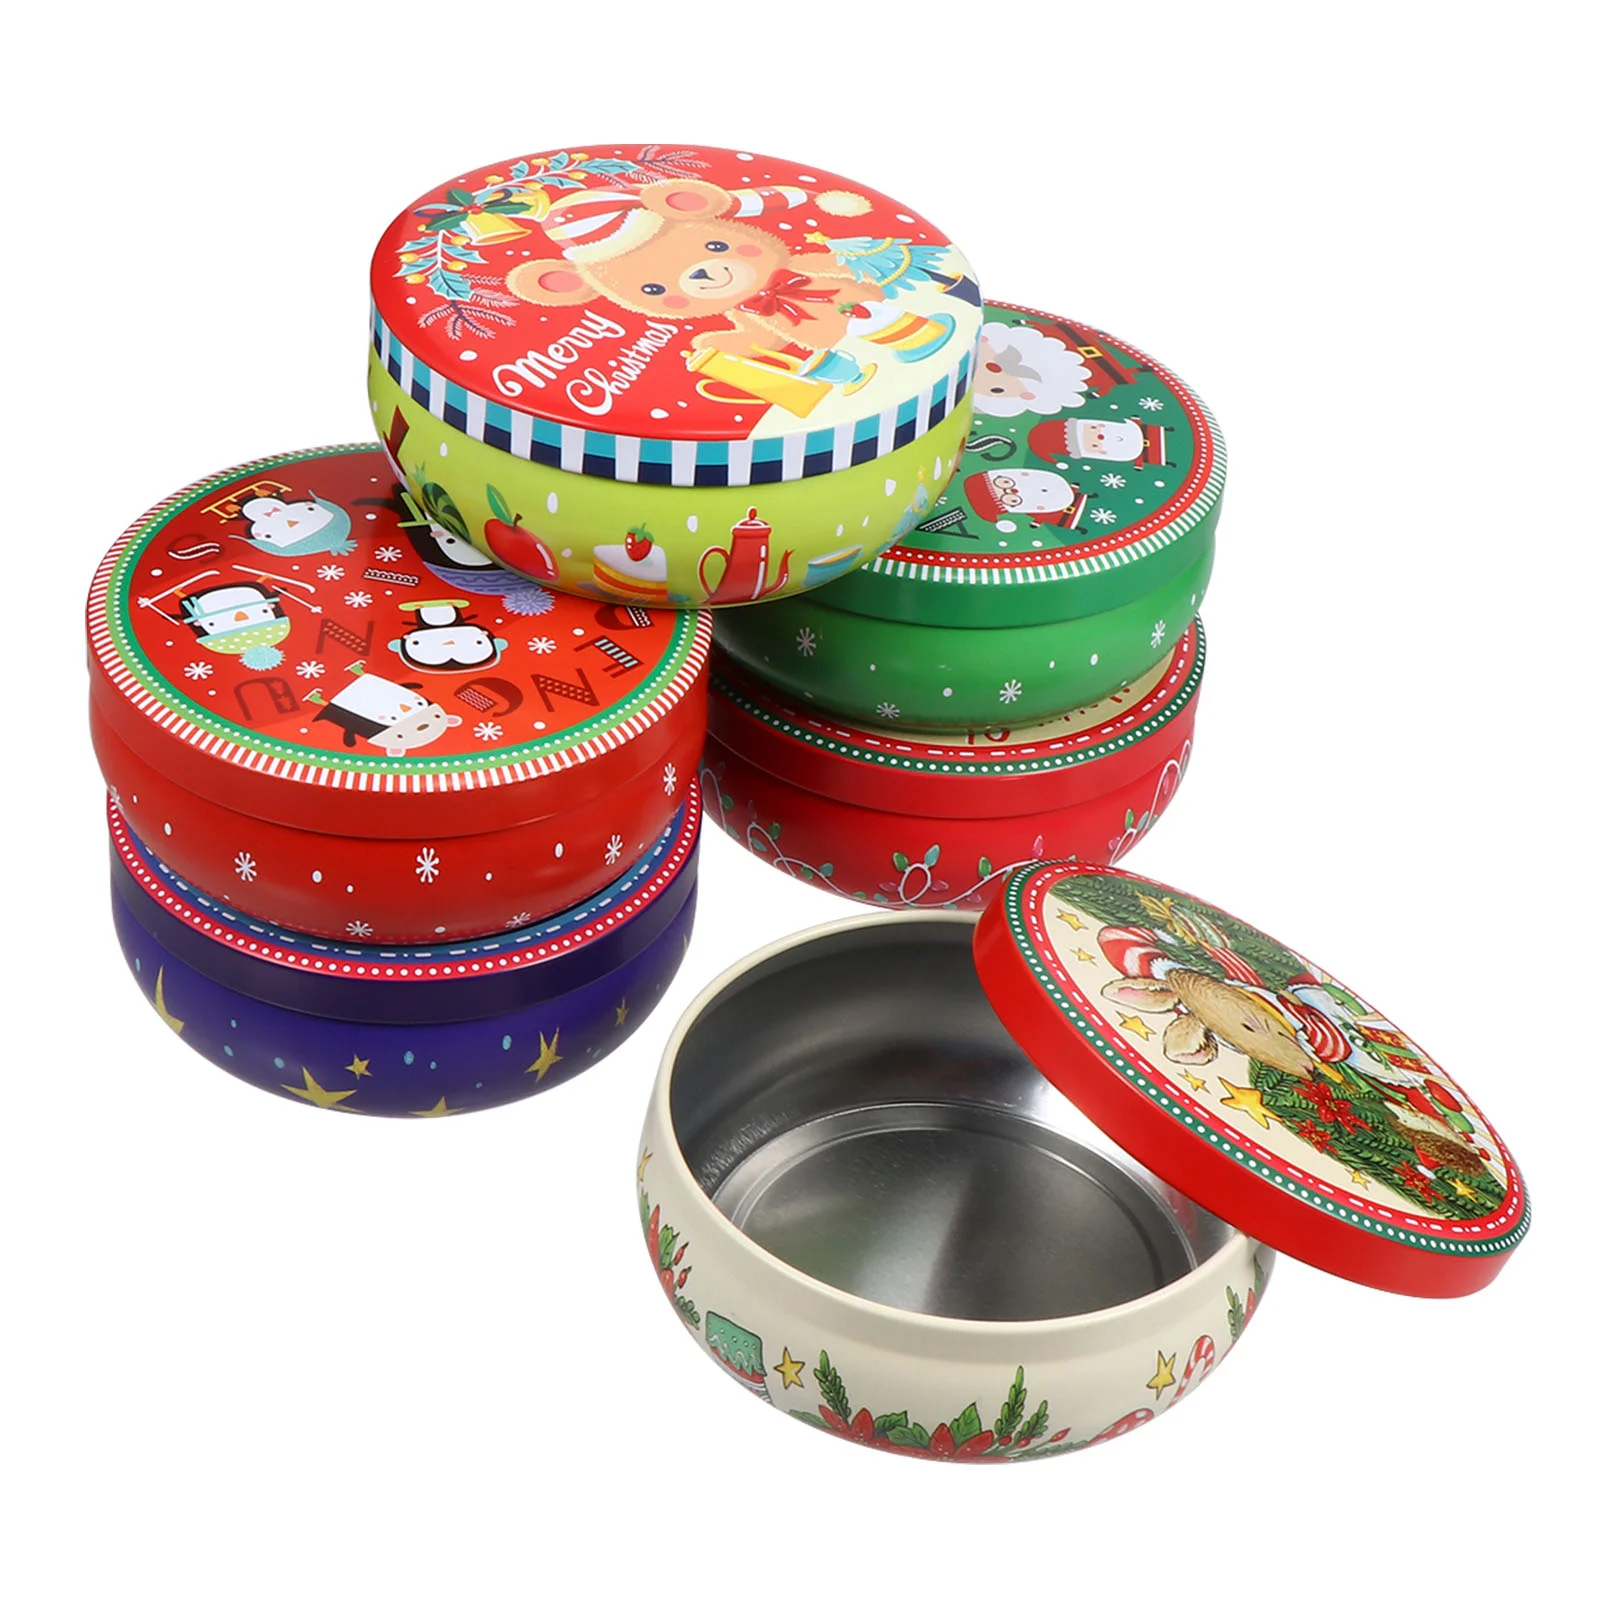 

Christmas Cookie Gift Tinscandy Giving Boxeslids Tin Box Storage Jar Round Metal Containersholiday Tinplate Decorative Lid Treat